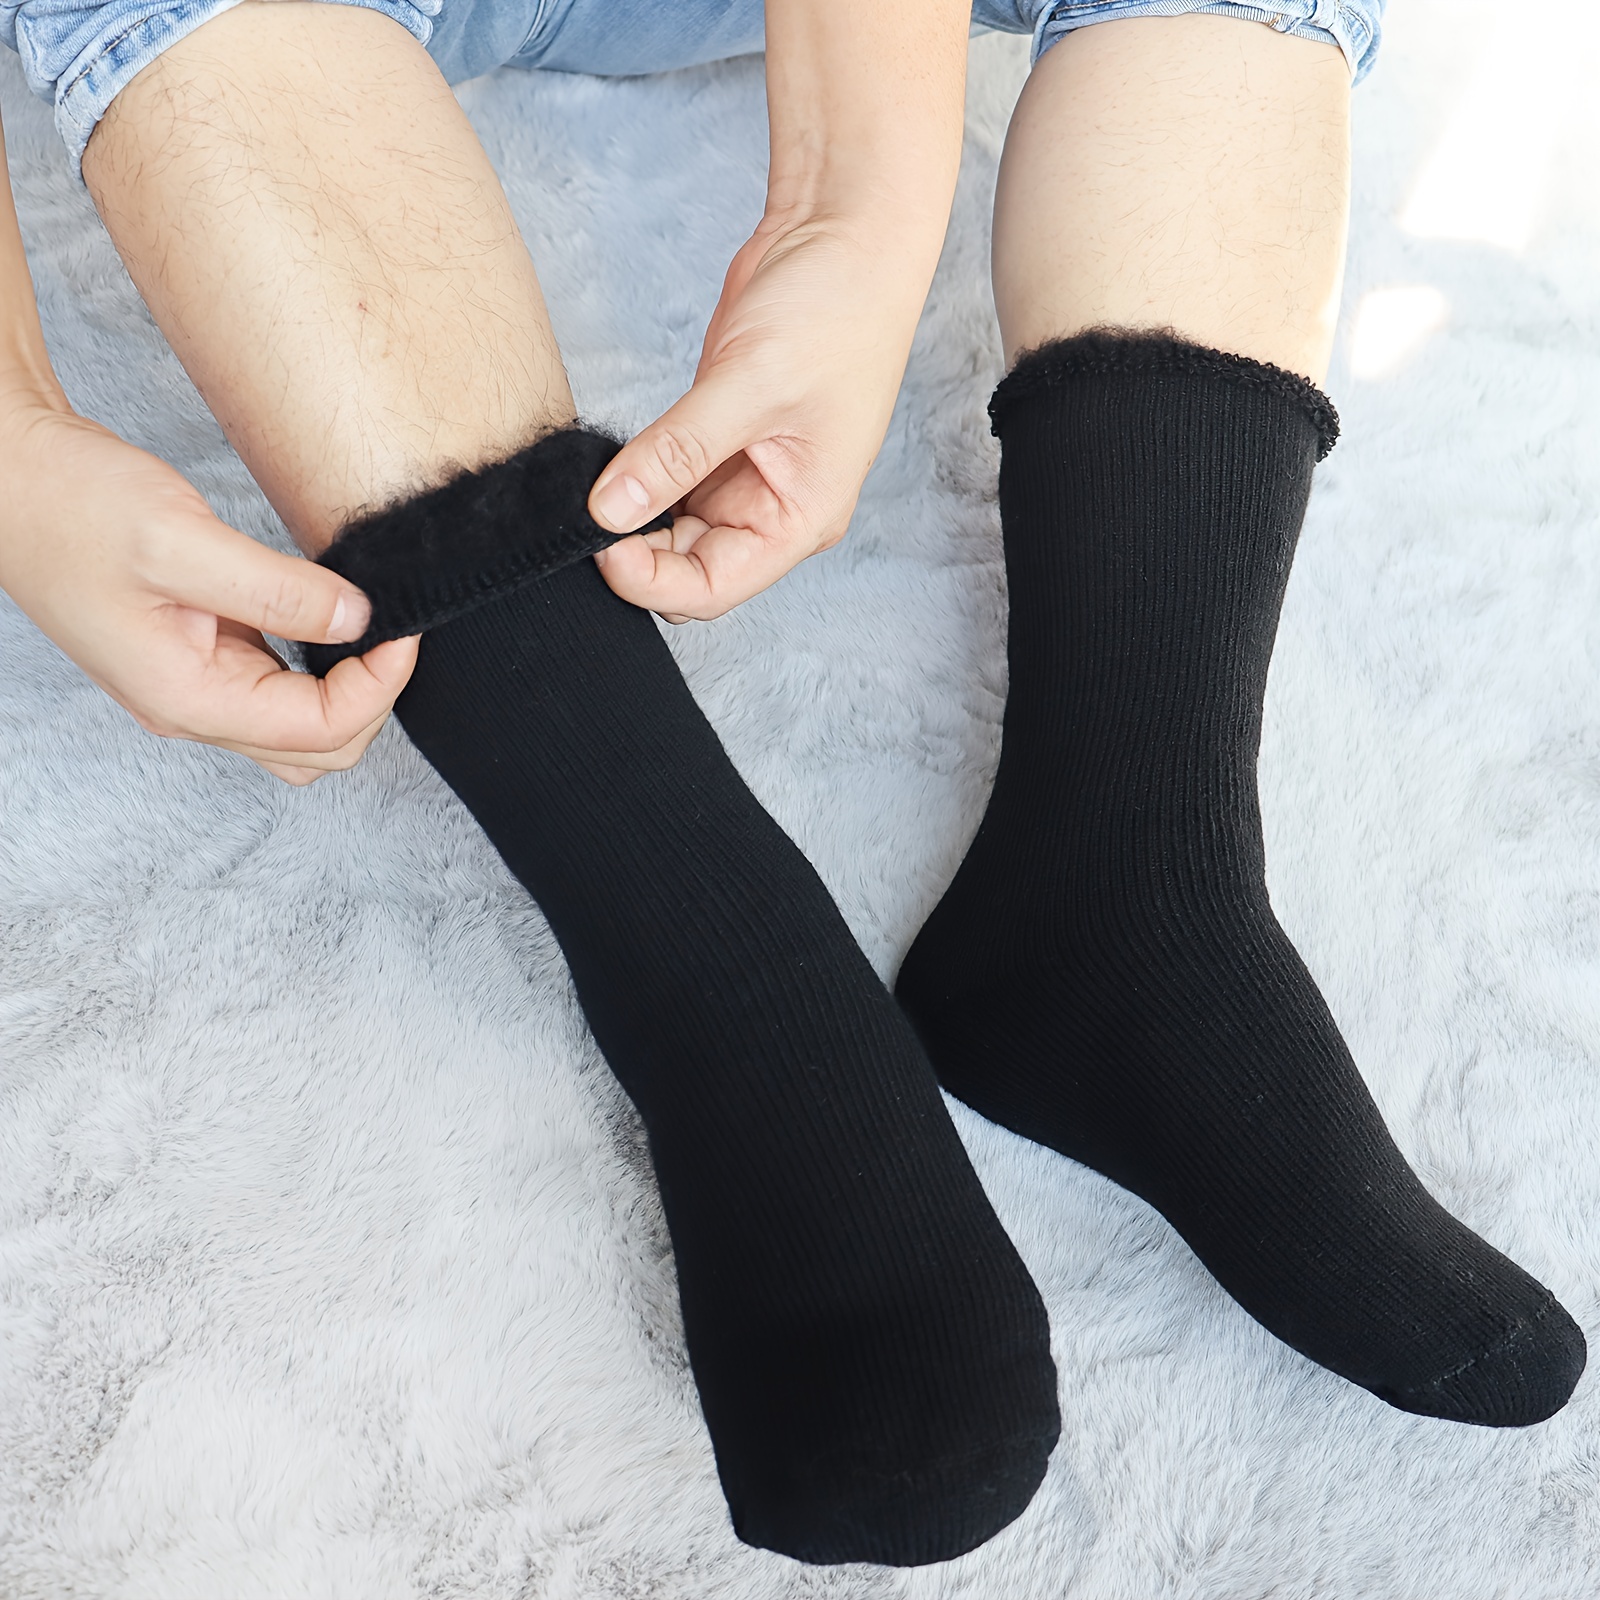 Warm Socks | Winter Warm Thermal Socks For Men Women | Extra Thick  Insulated Heated Crew Boot Socks For Extreme Cold Weather